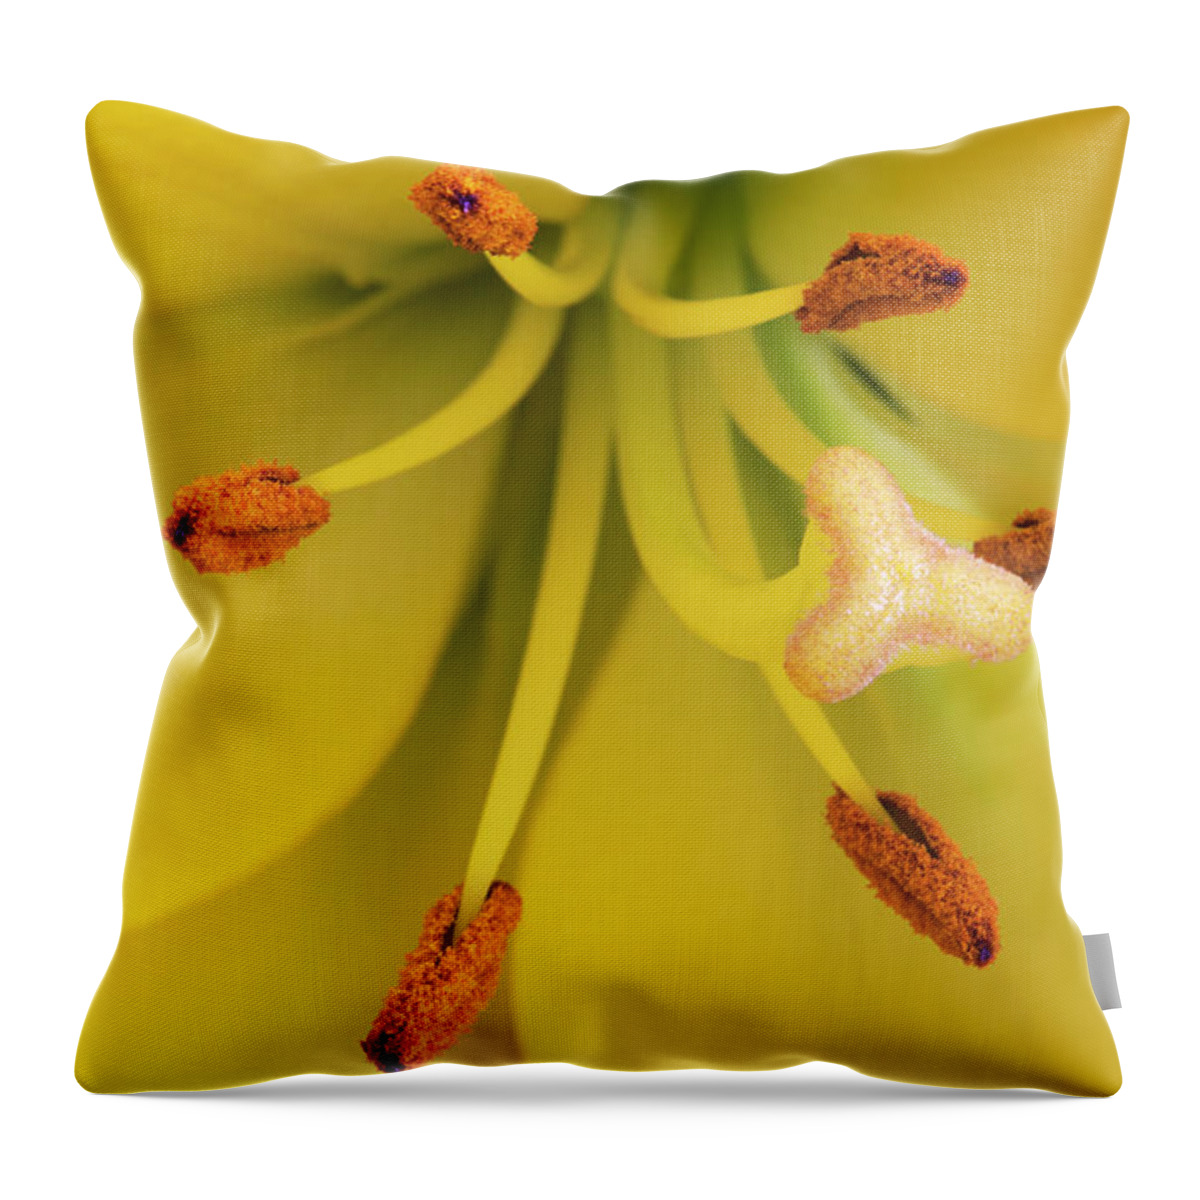 Netherlands Throw Pillow featuring the photograph Yellow Lily, Pistil And Stamens by Roel Meijer